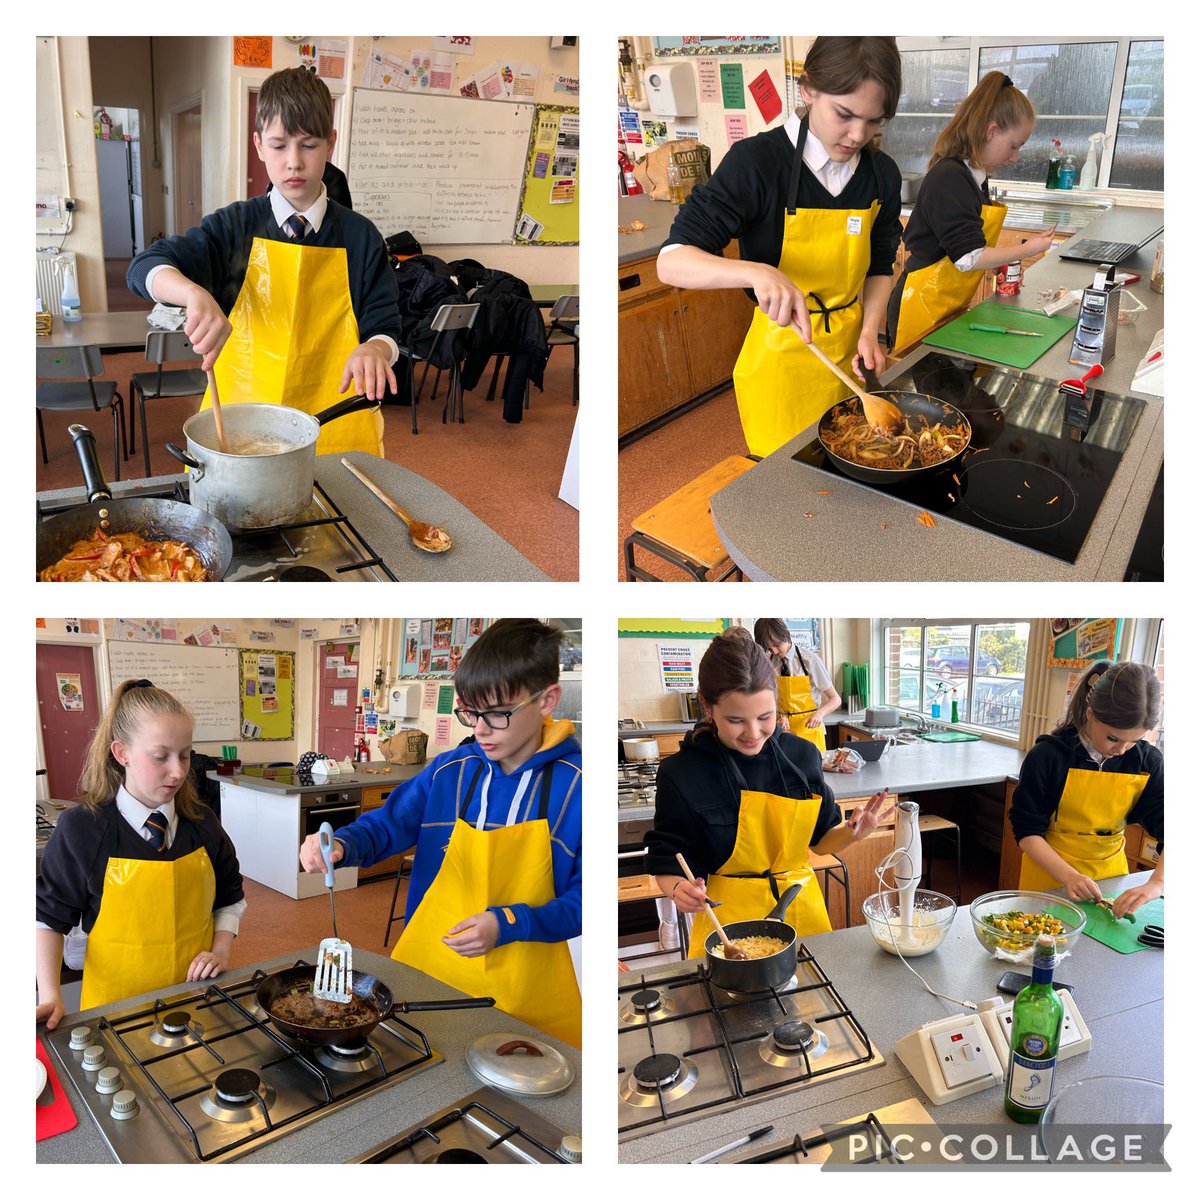 Today, our Y10 class cooked up a storm as part of their Princes Trust qualification. Here they are, prepping and working hard to cook their healthy, balanced meals 🧑🏻‍🍳 @PrincesTrust #lifeskills